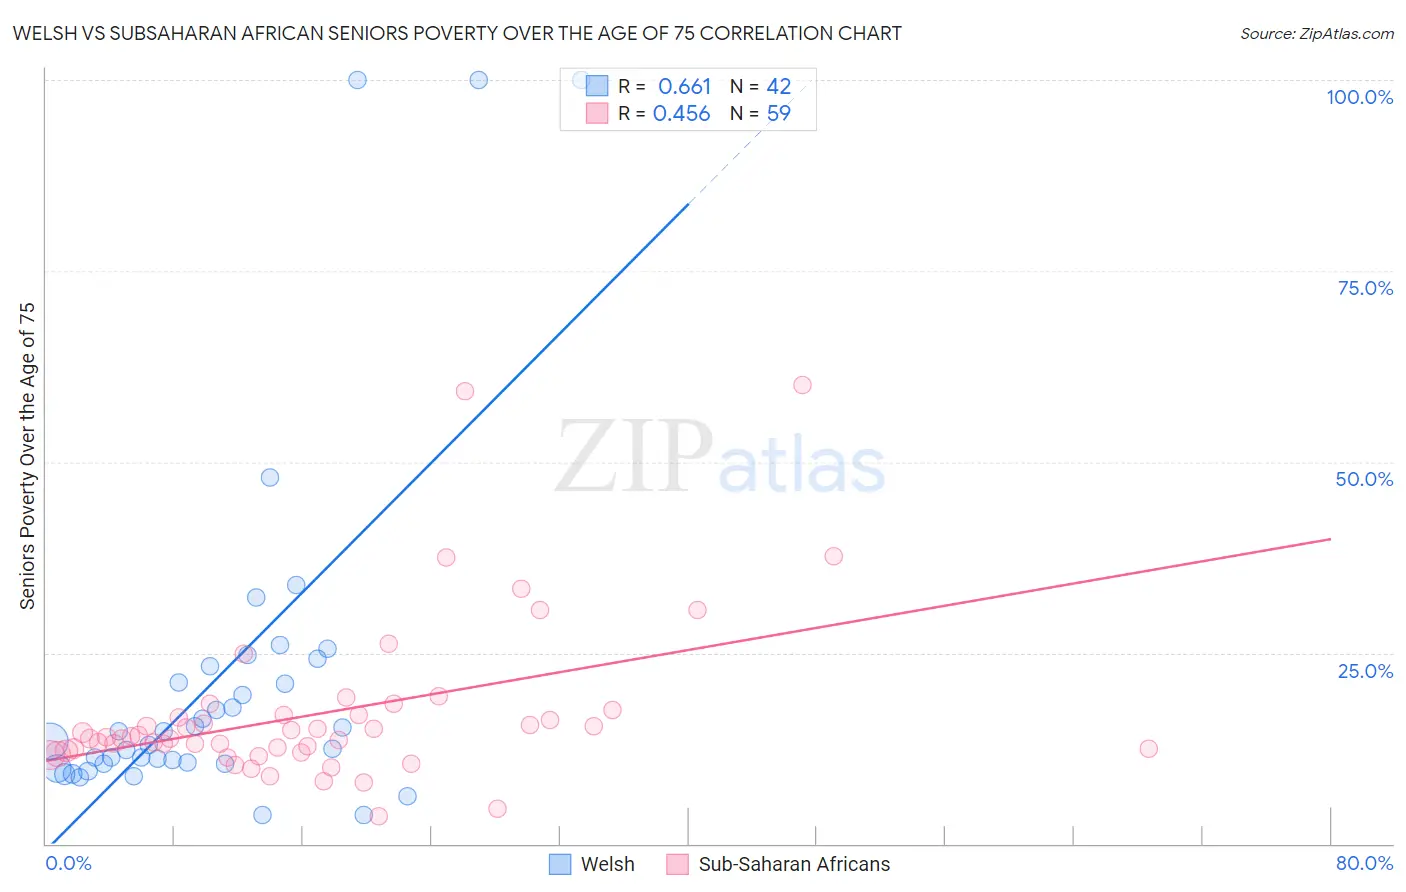 Welsh vs Subsaharan African Seniors Poverty Over the Age of 75